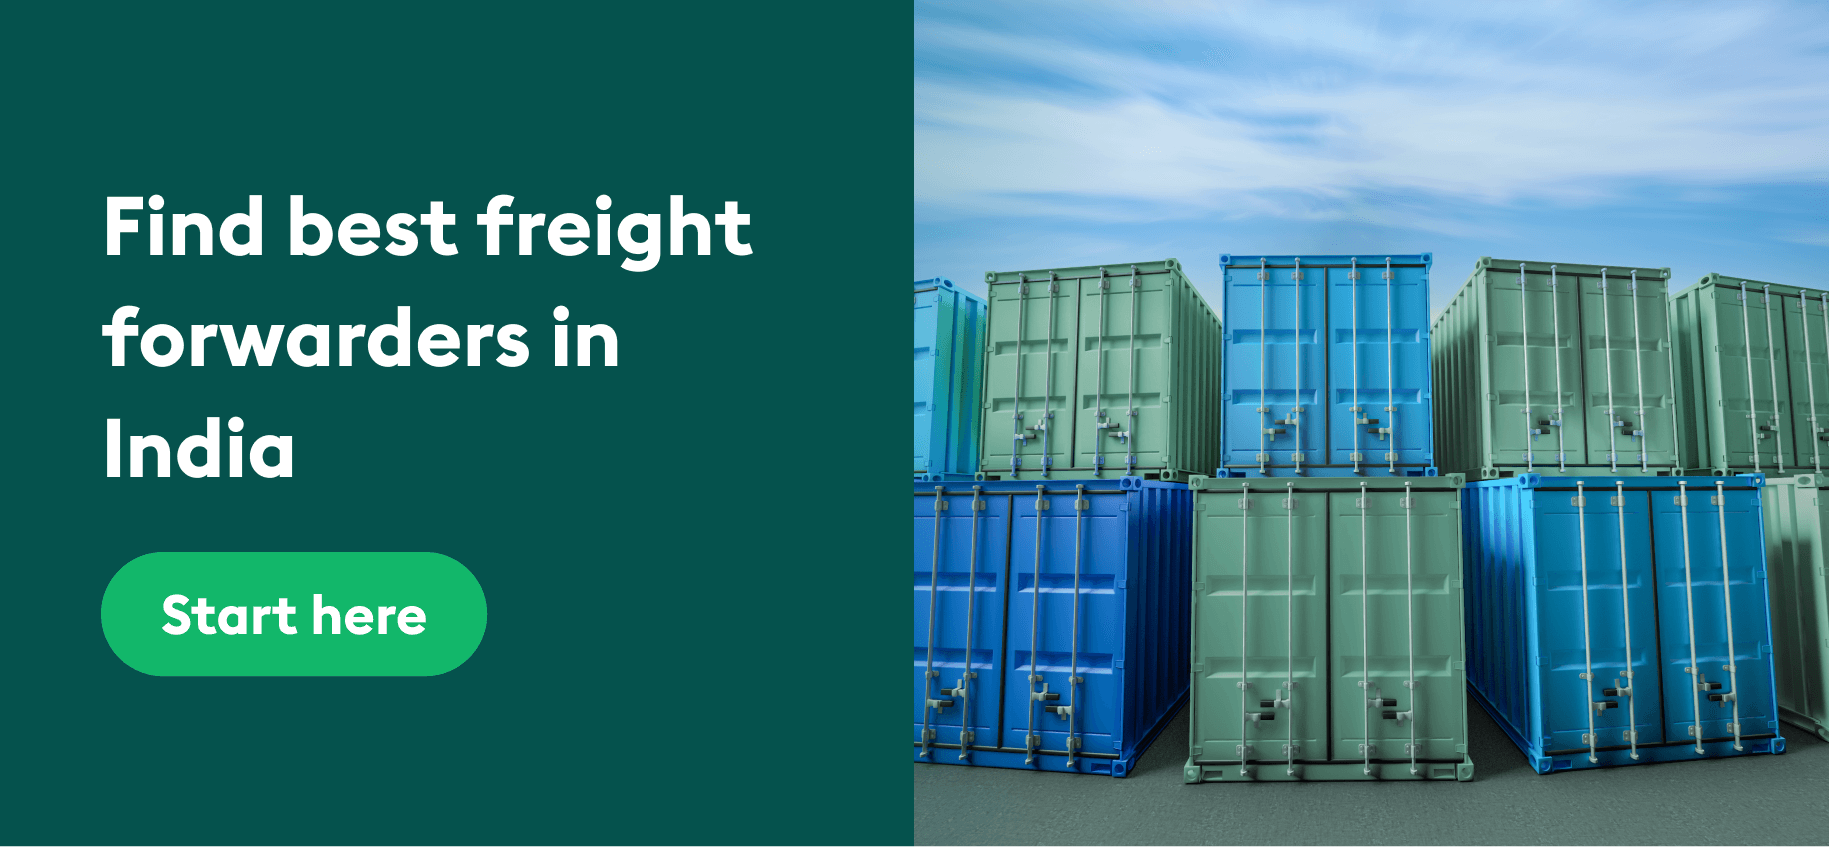 Banner for freight forwarders in India